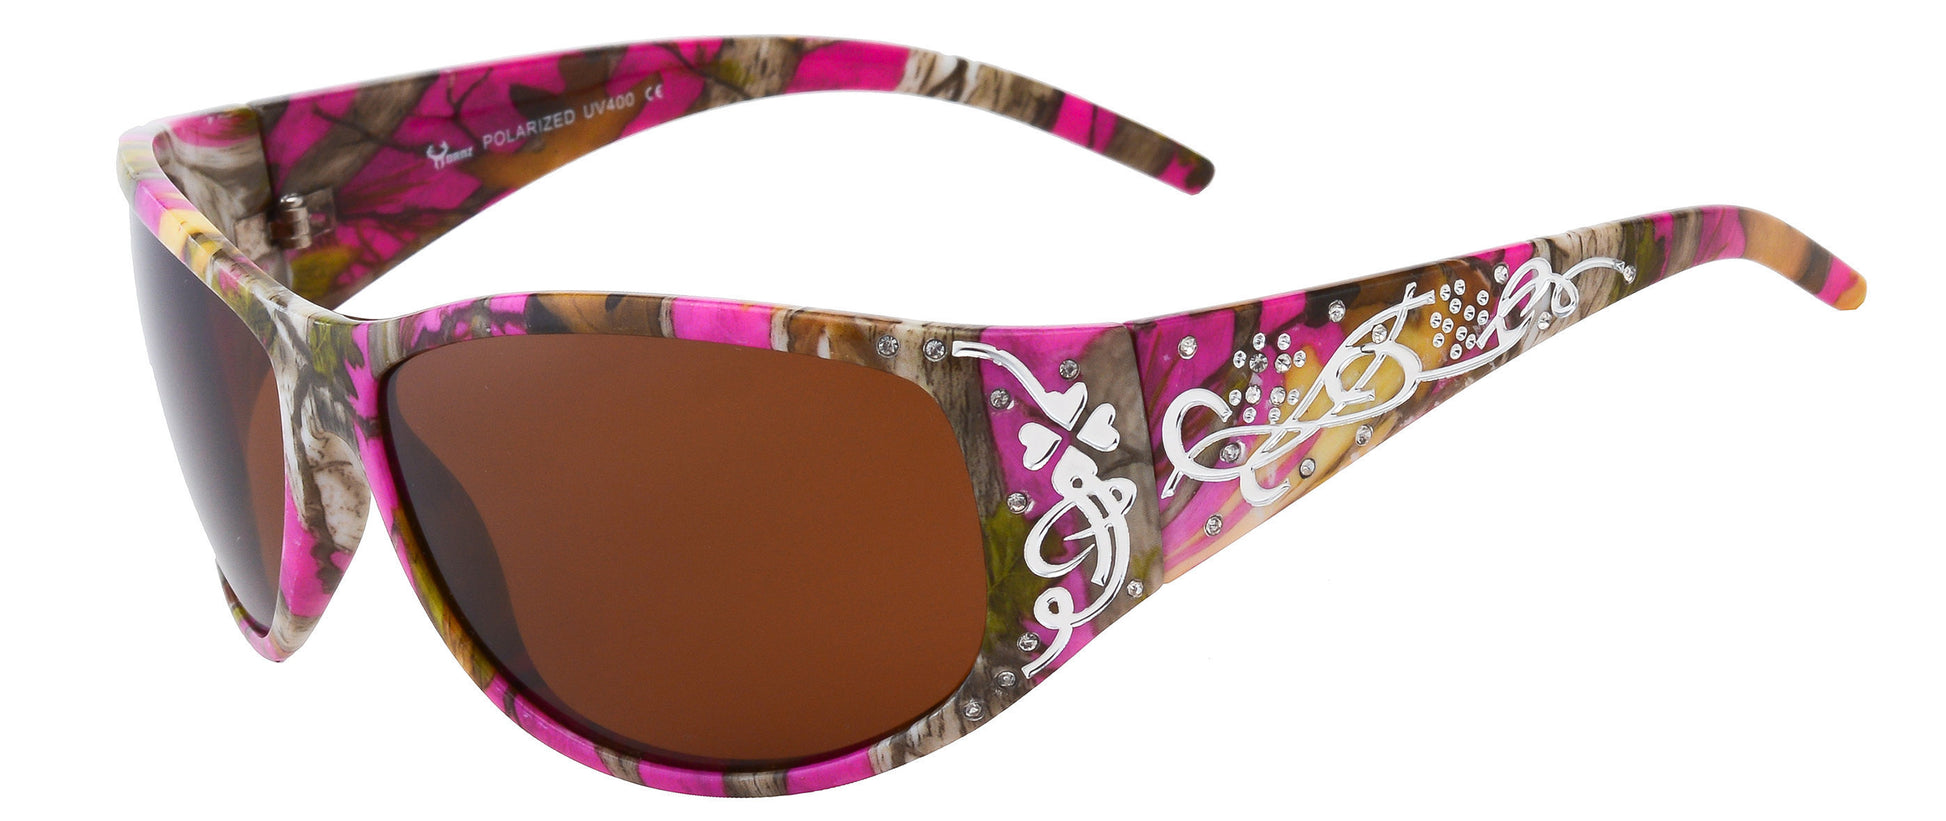 Main image: Hornz Hot Pink-Purple Camouflage Polarized Sunglasses Country Girl Style Camo & Free Matching Microfiber Pouch - Hot Pink-Purple Camo Frame - Amber Lens